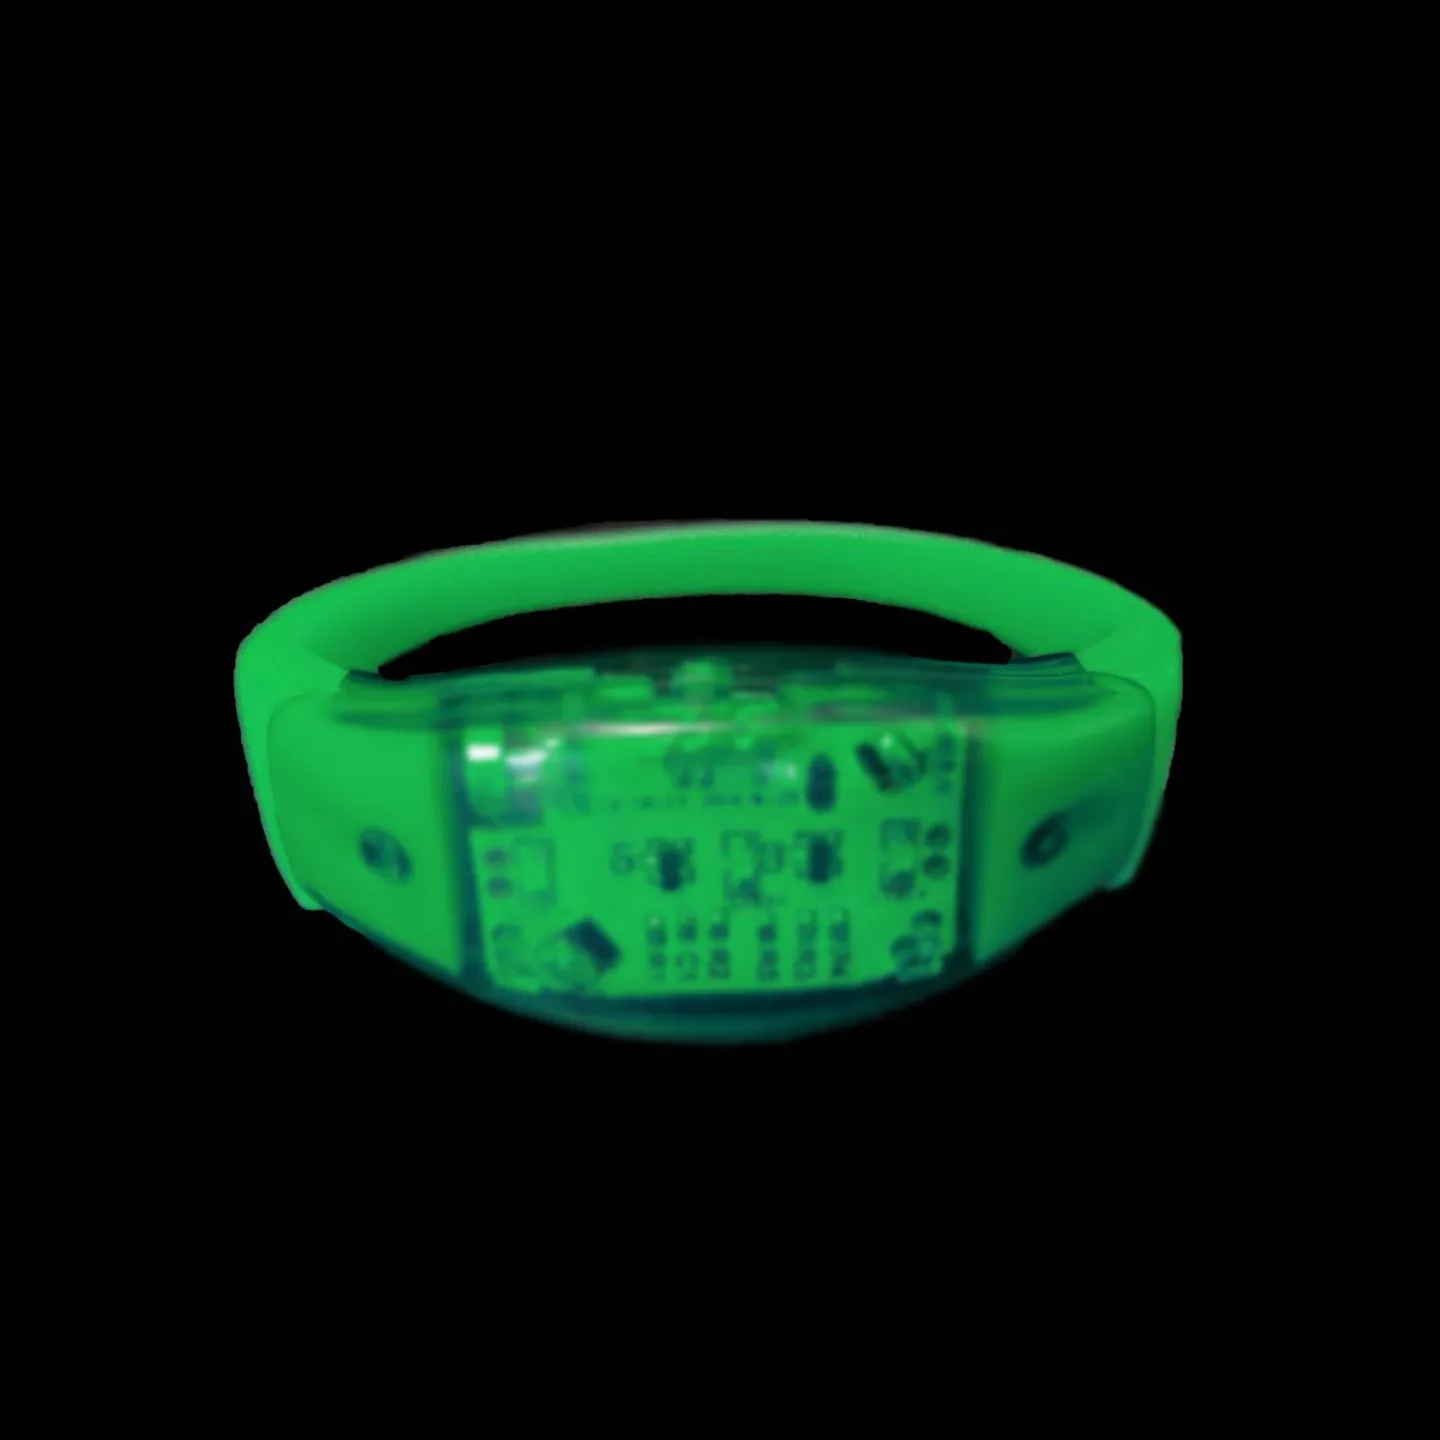 Sound activated LED armband Groen.